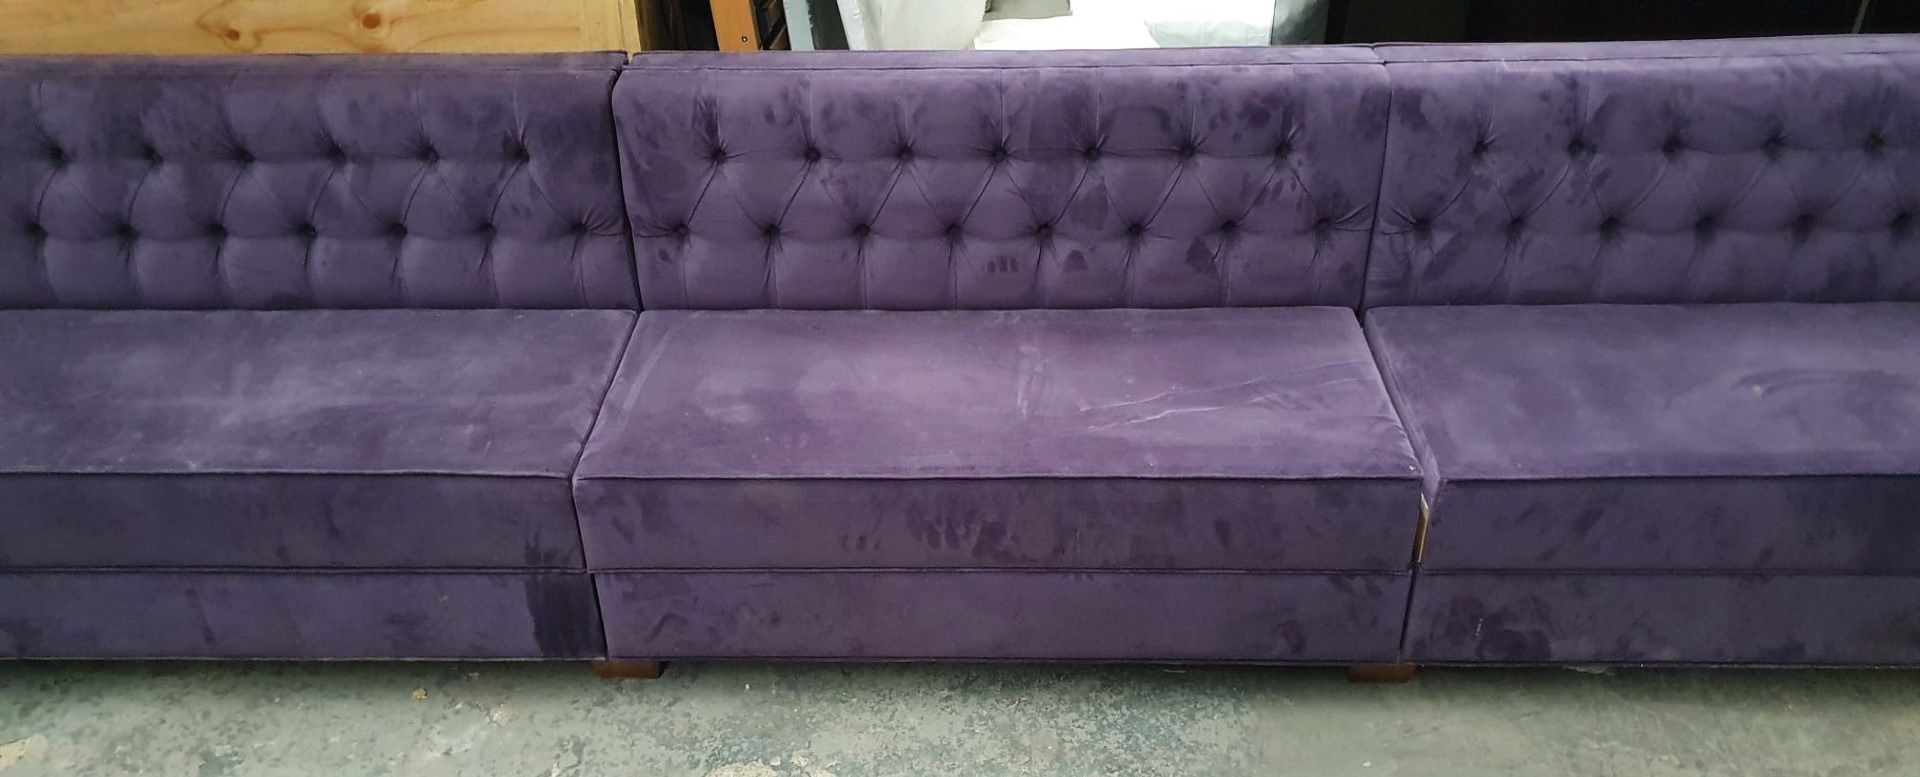 5.2-Metres Of Commercial Sofa Seating, Upholstered In A Premium Purple Fabric - Ref: G/IT - CL815 - Image 4 of 6